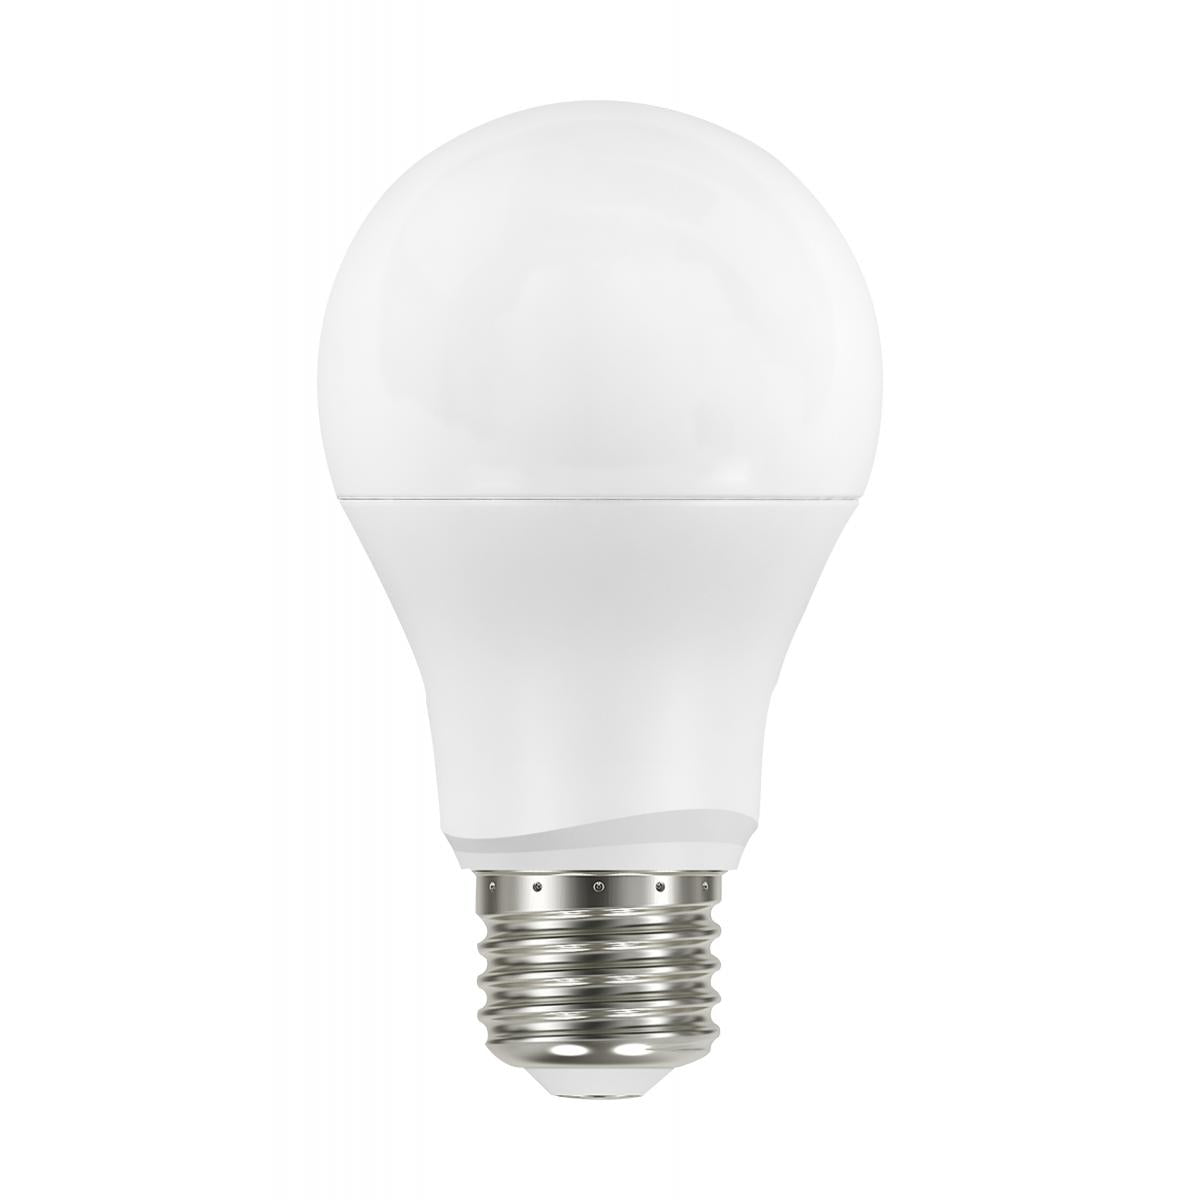 LED Dusk to Dawn Bulb - Frosted